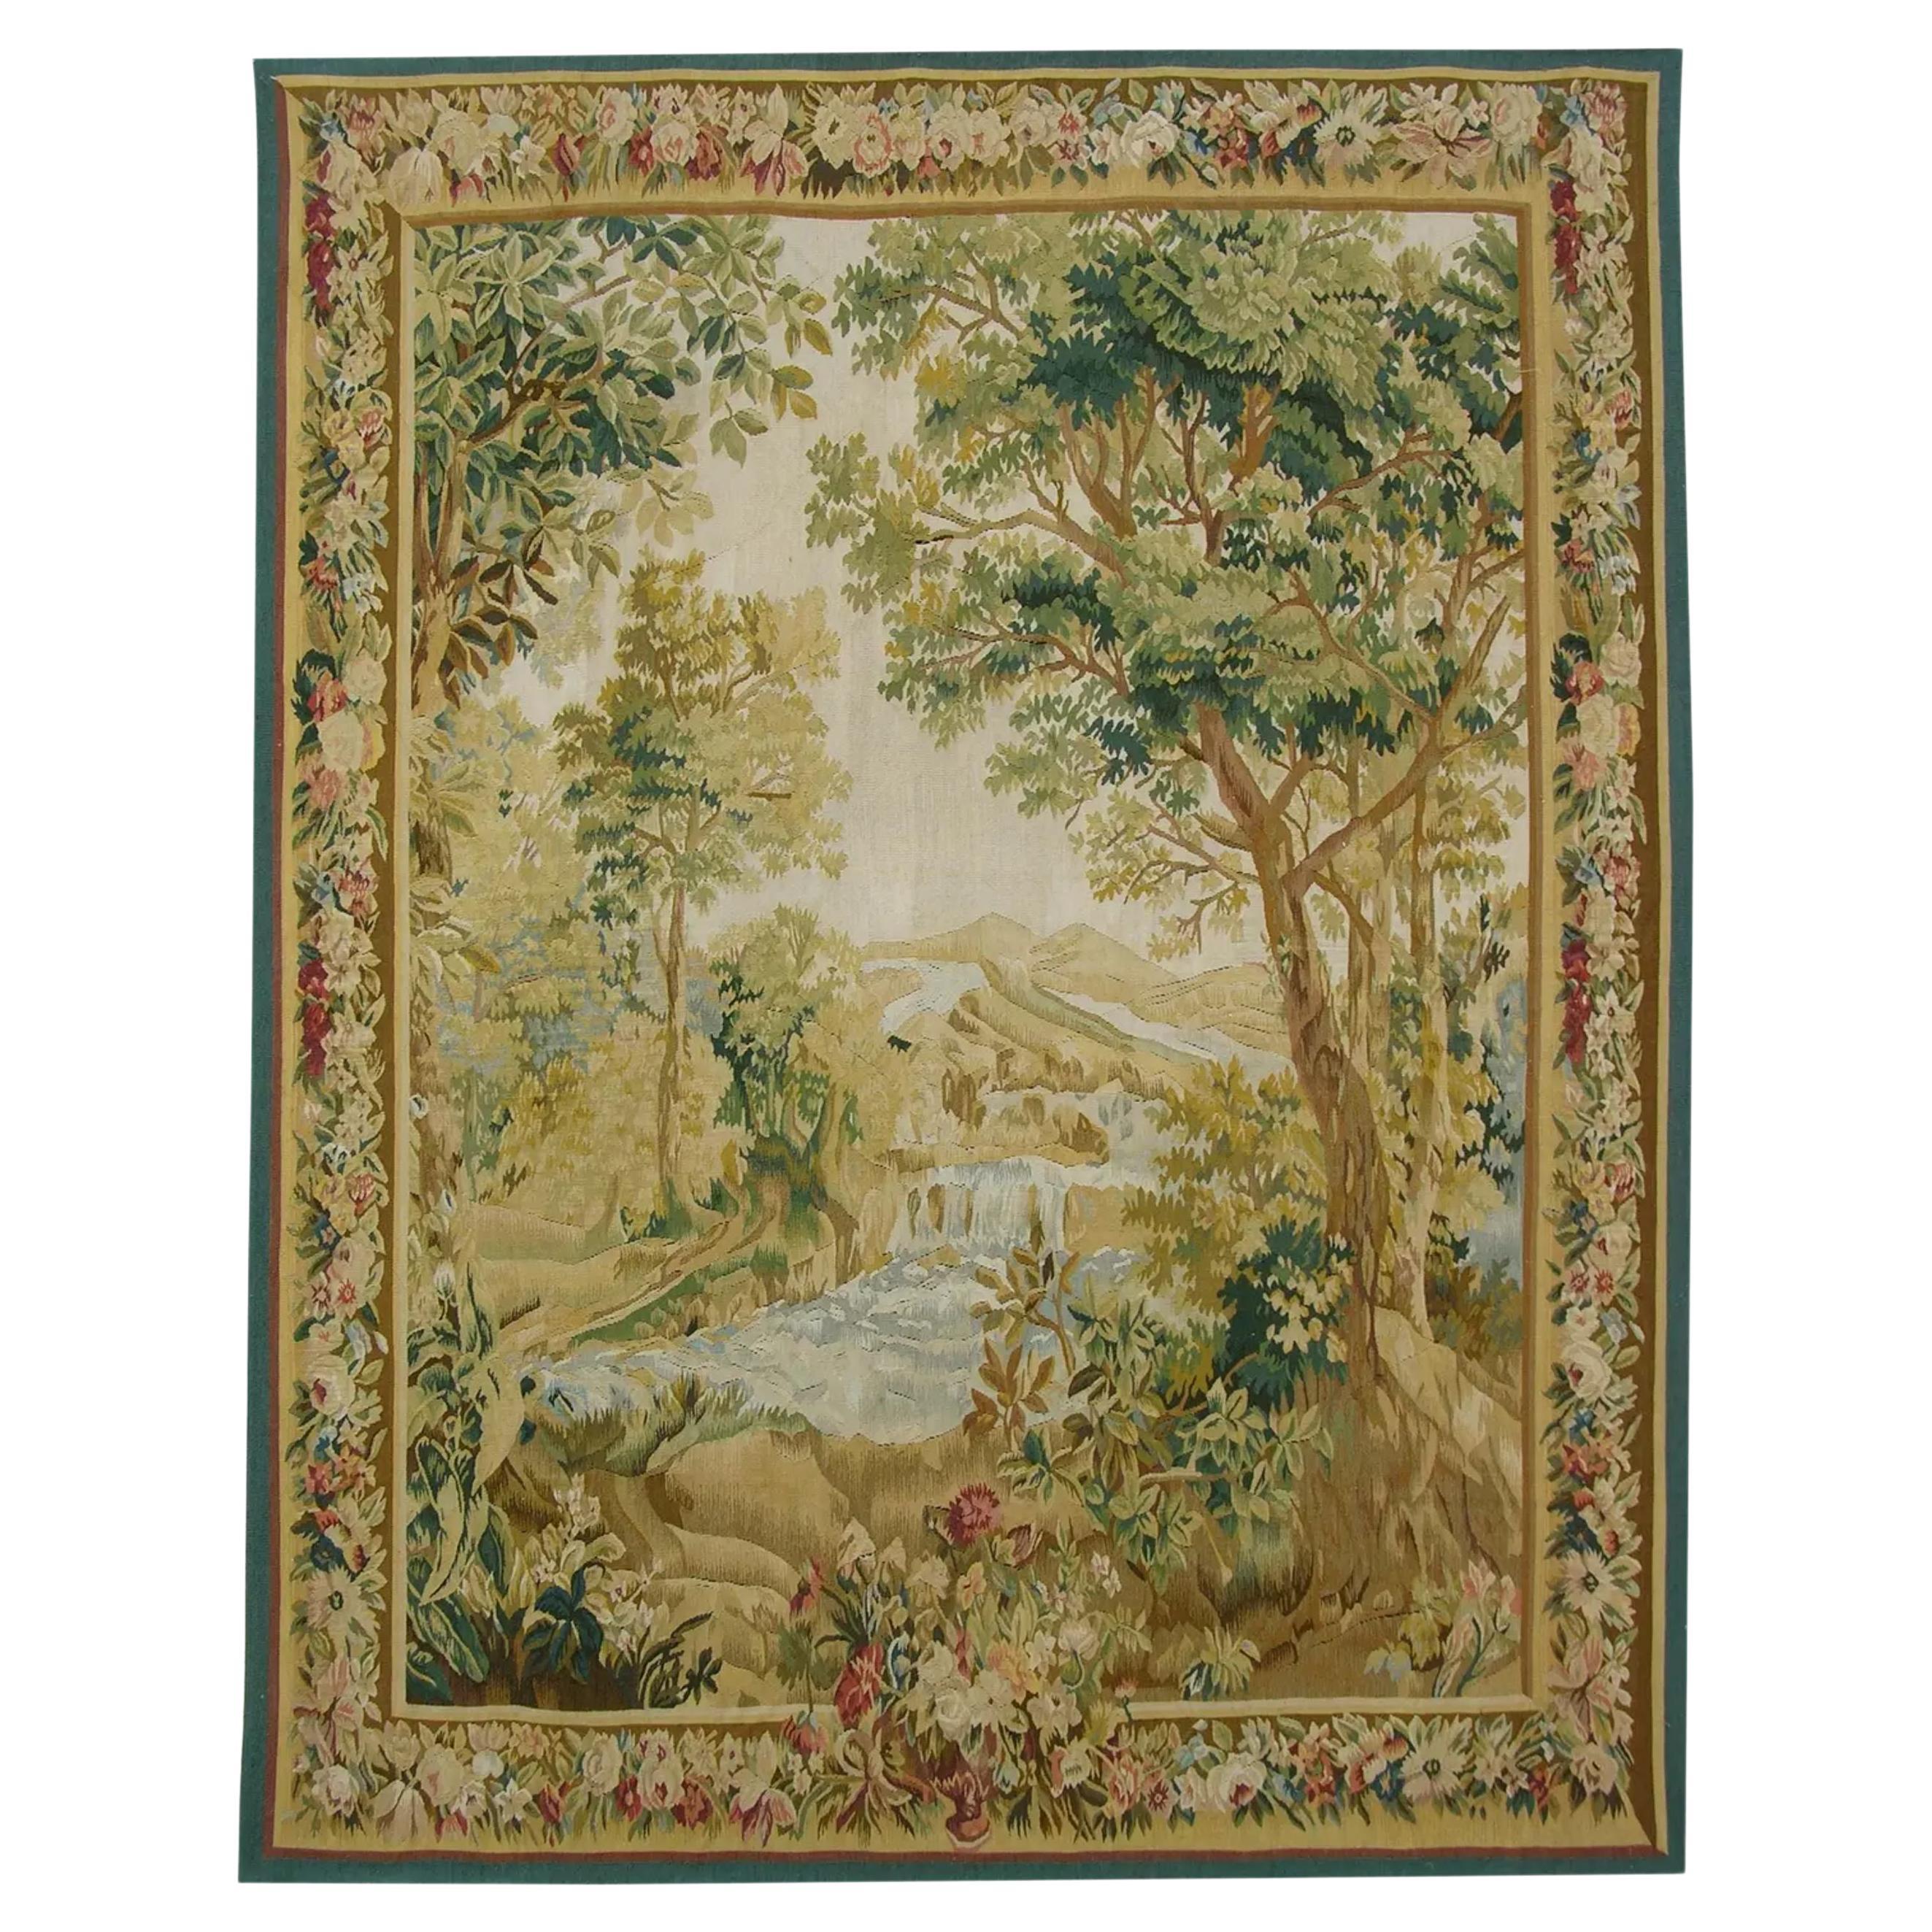 Vintage Woven Outdoor Scene Tapestry 6.25X5.0